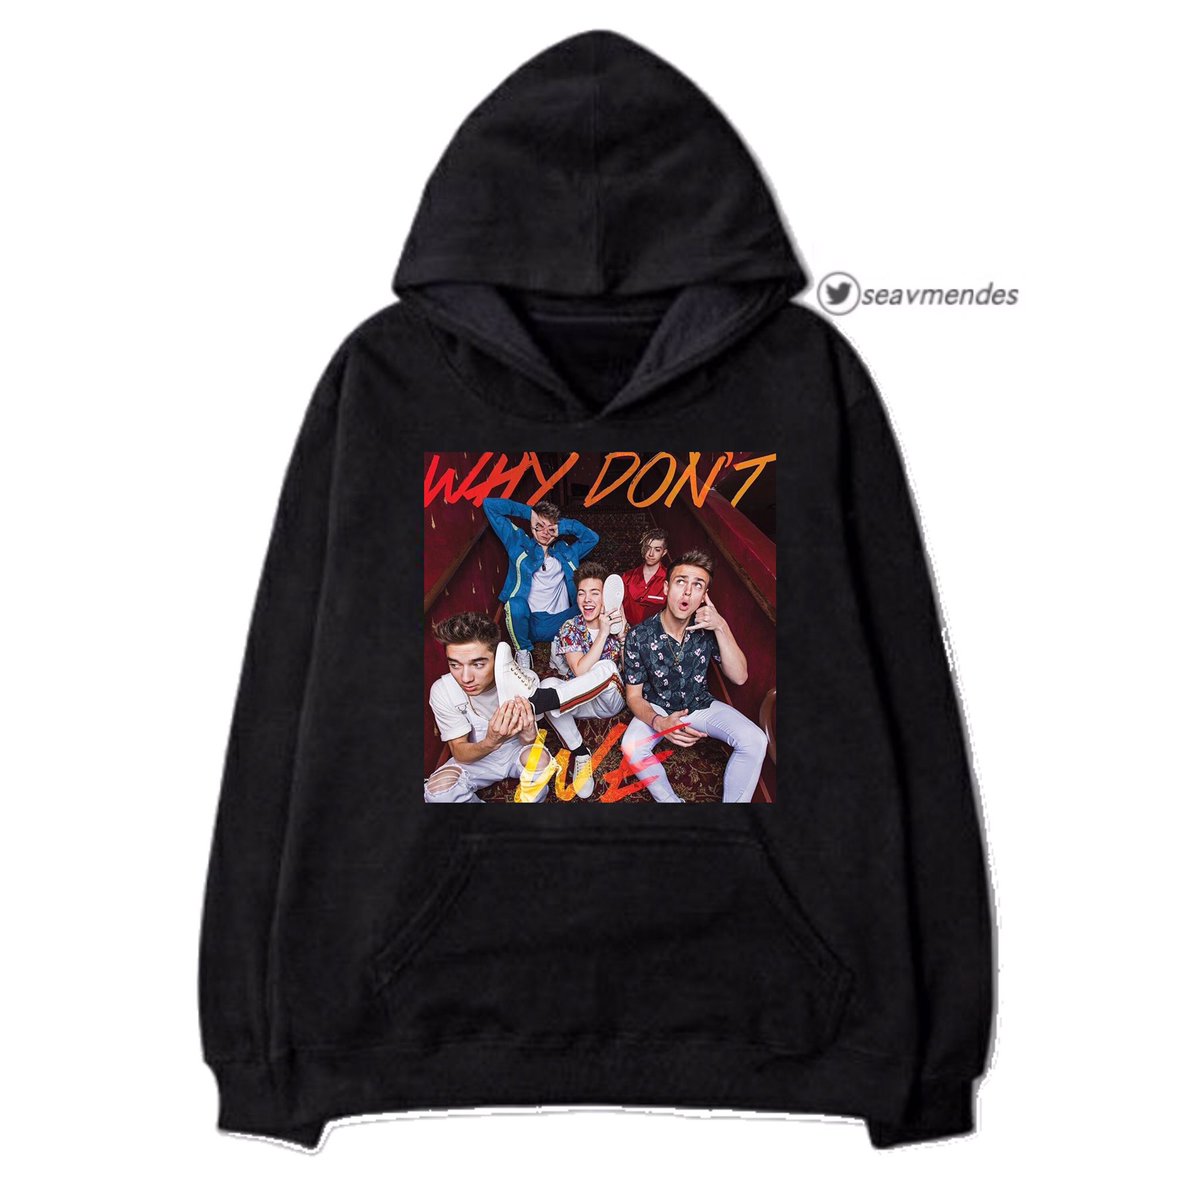 why don’t we graphic hoodies